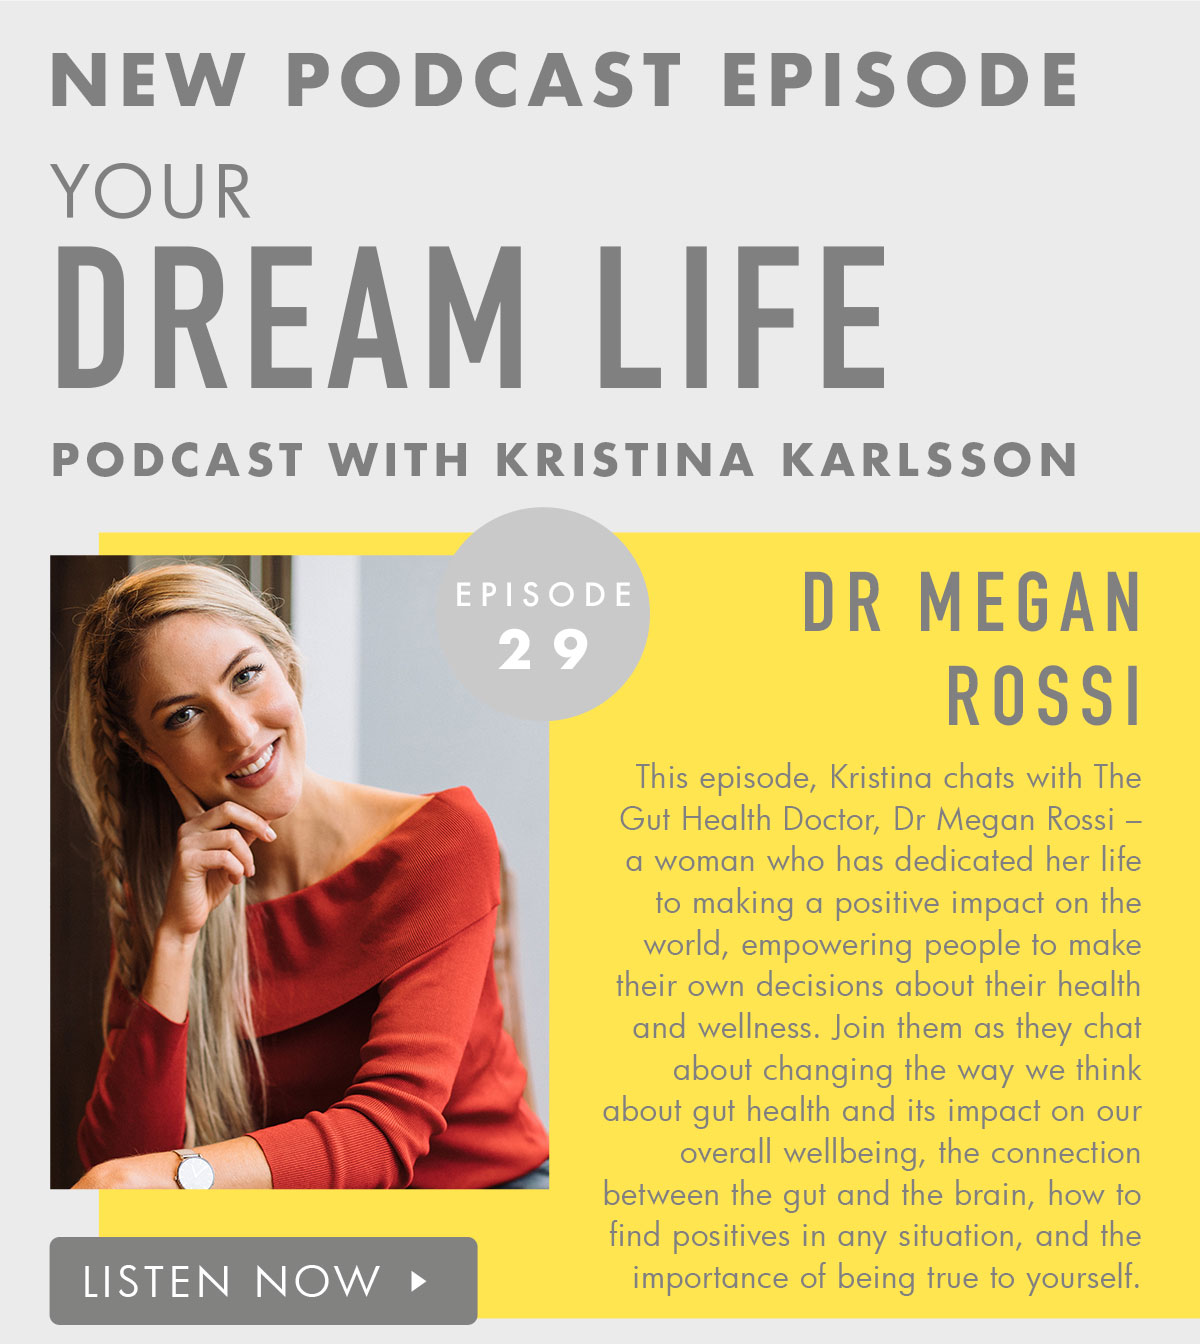 New Your Dream Life Podcast Episode. Listen now. 